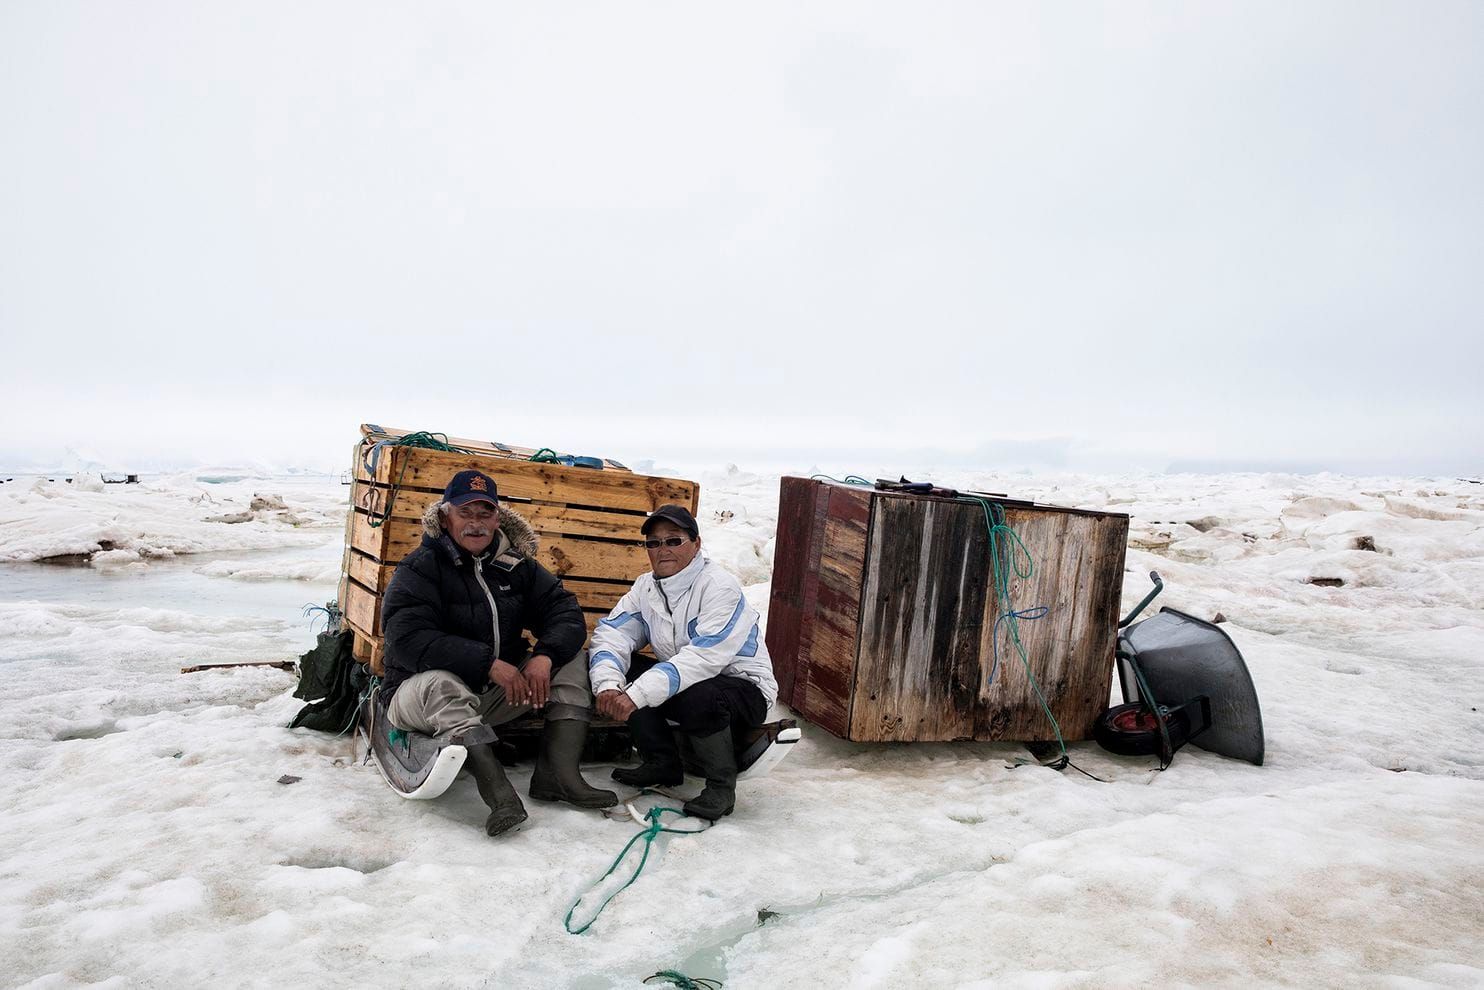 "The situation here is not new and surely can't get any worse," say Inukitsorsuaq and Genovira Sadorana. Greenland, 2019. Image by Anna Filipova. 